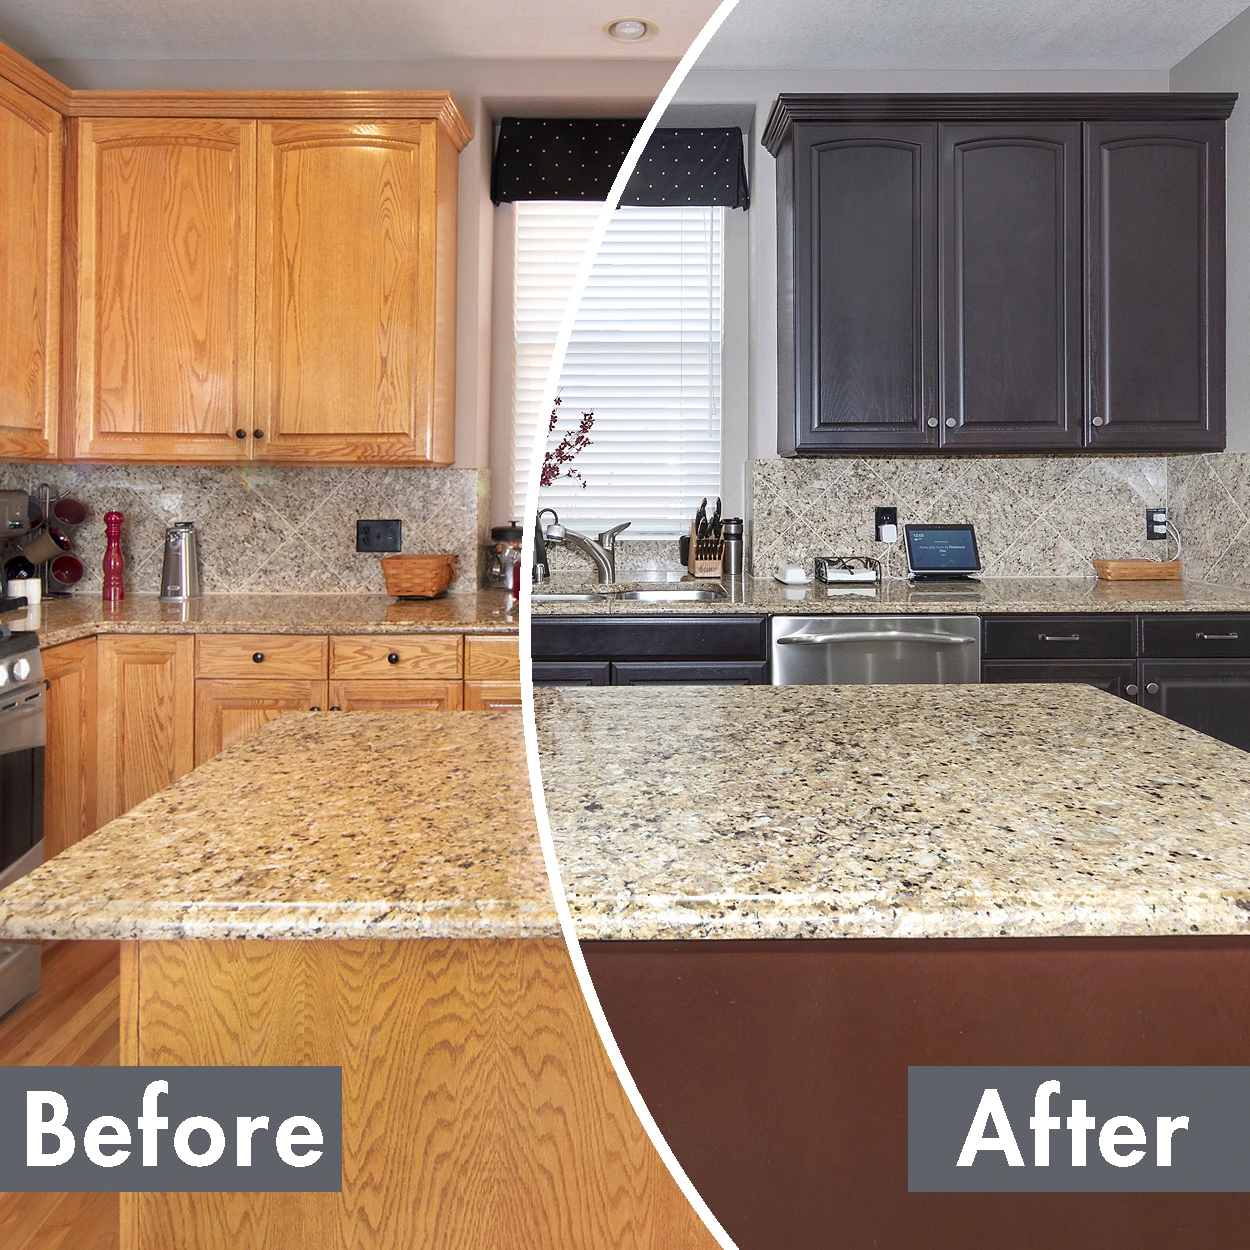 On the left, a kitchen with unpainted cabinets before N-Hance cabinet color change. On the right, the same kitchen, with the cabinets painted in a dark color, after N-Hance cabinet color change.